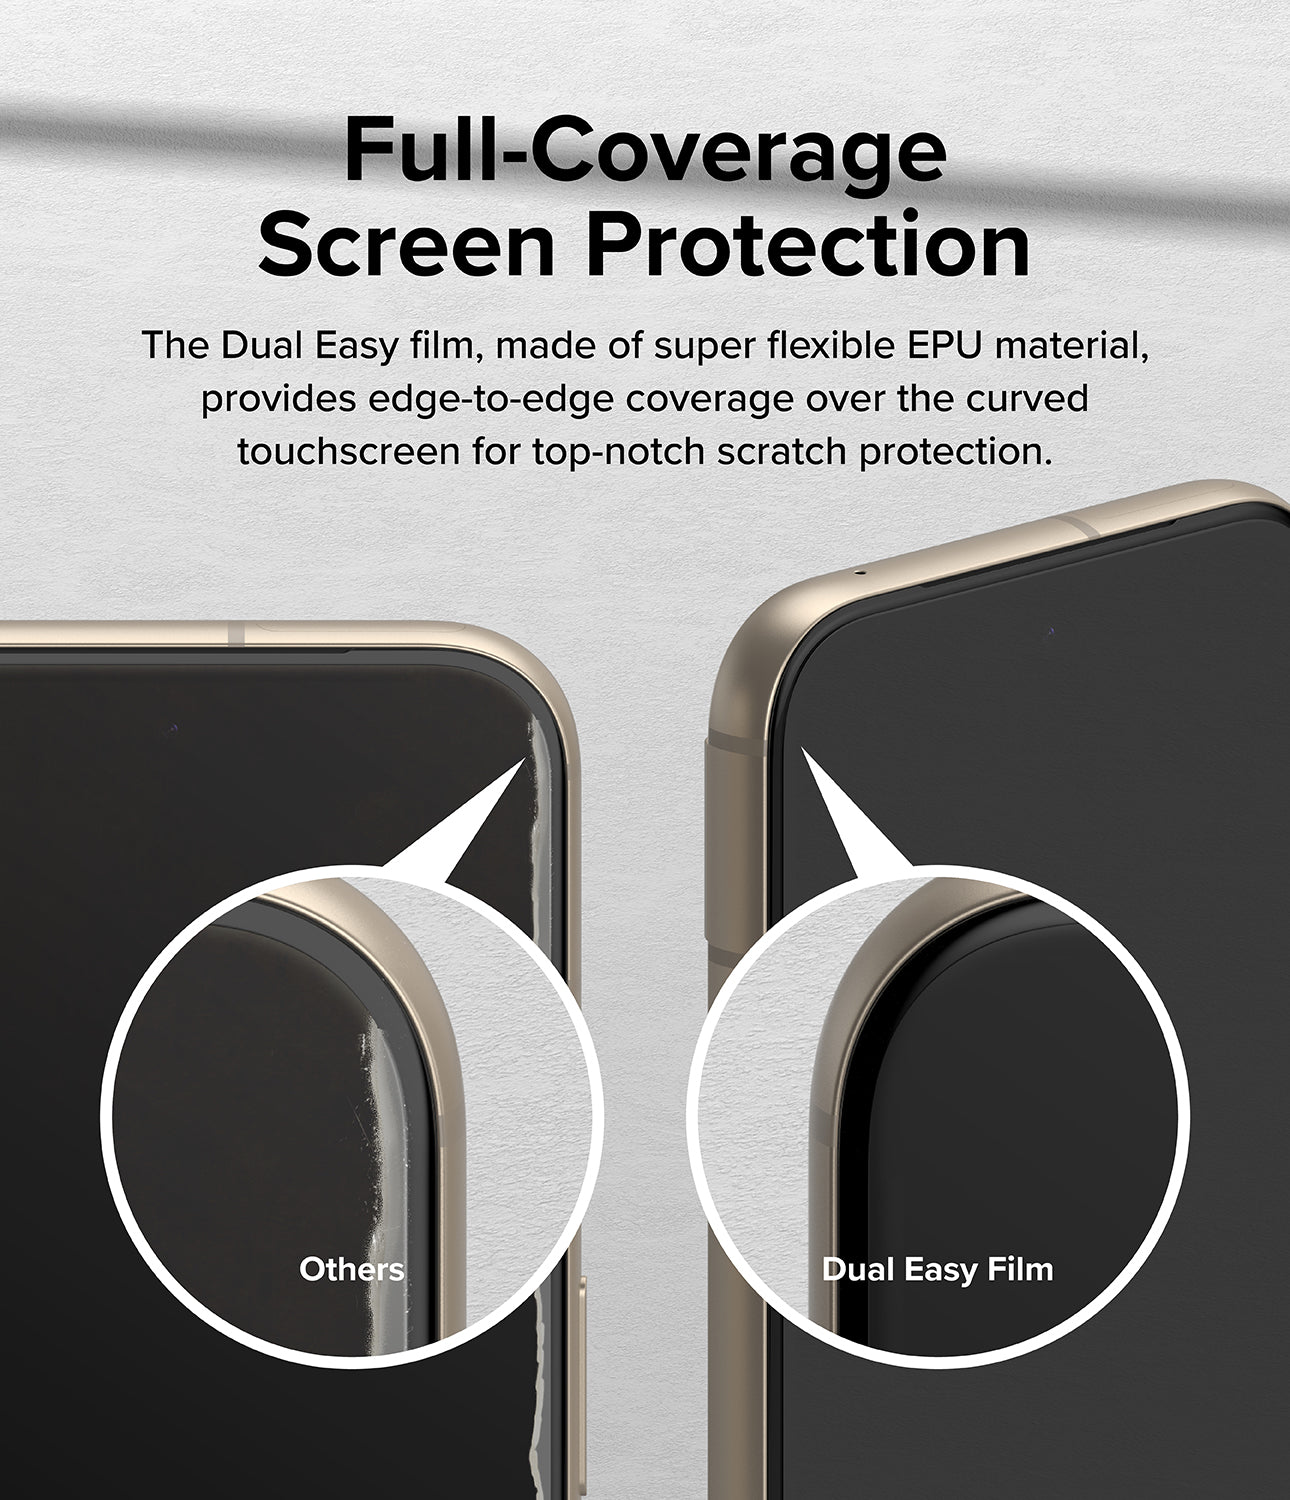 Google Pixel 8a Screen Protector | Dual Easy Film - Full-Coverage Screen Protection. The Dual Easy Film, made of super flexible EPU material, provides edge-to-edge coverage over the curved touchscreen for top-notch scratch protection.